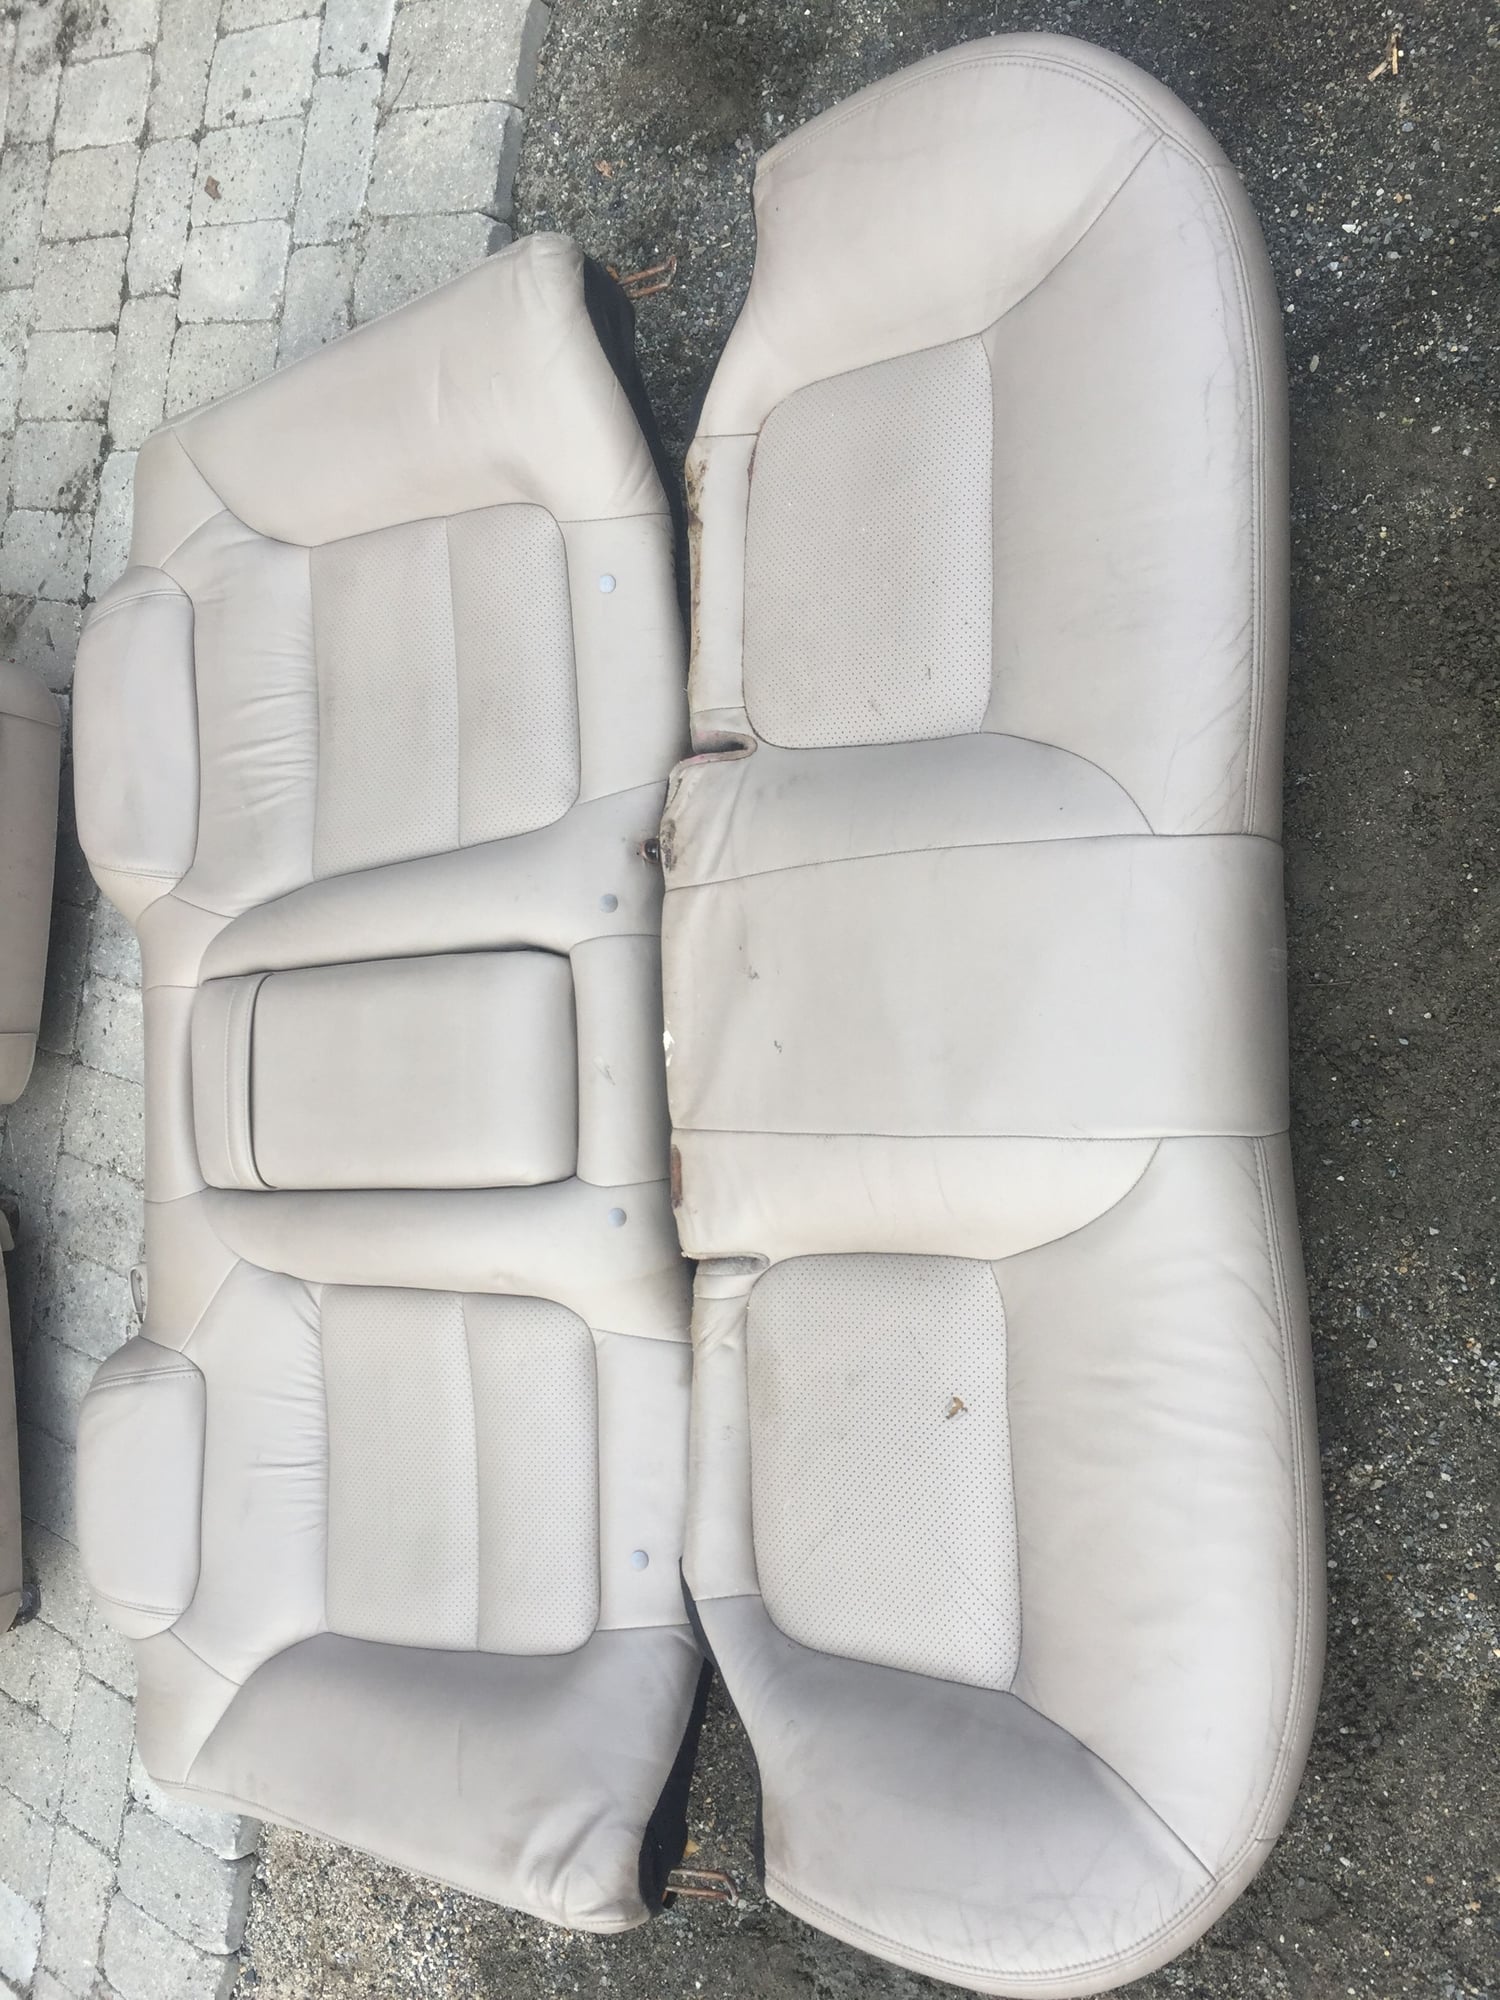 Interior/Upholstery - FS: Acura type s seats tan - Used - 1999 to 2003 Acura TL - Morris, CT 06763, United States